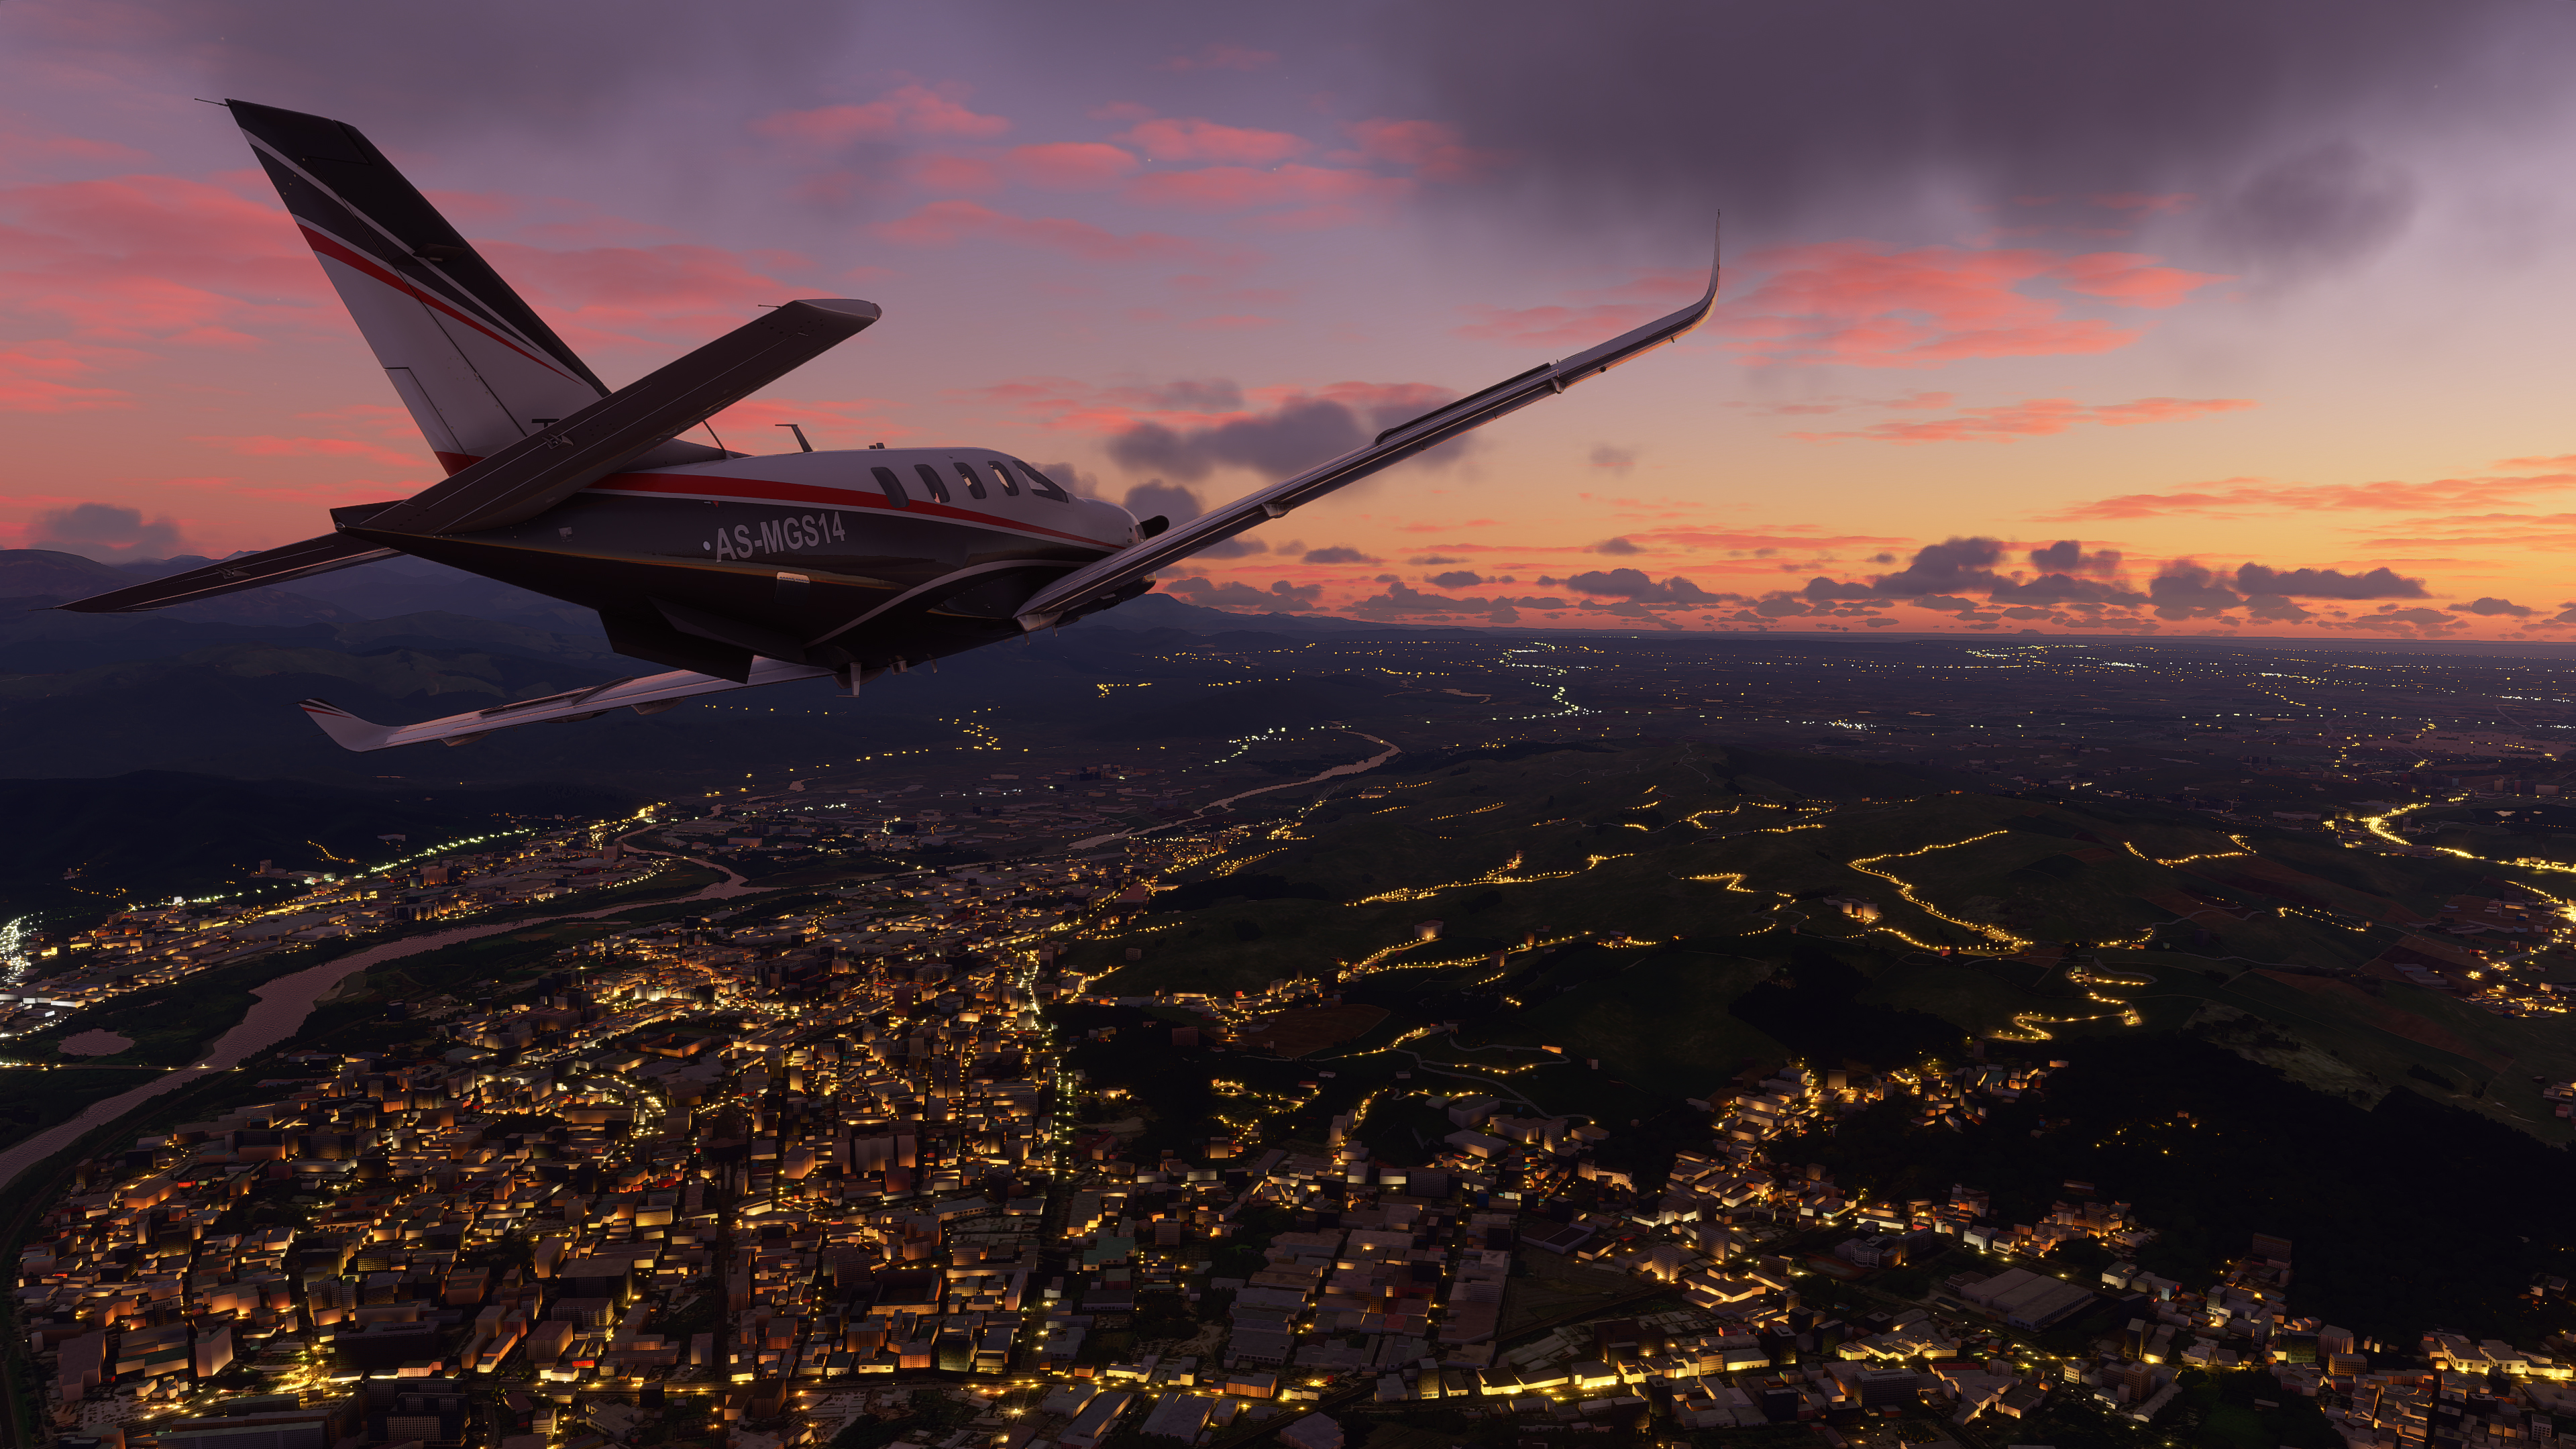 Constitution Abbreviation pyramid Microsoft Flight Simulator is coming to next-gen Xbox consoles next summer  - The Verge